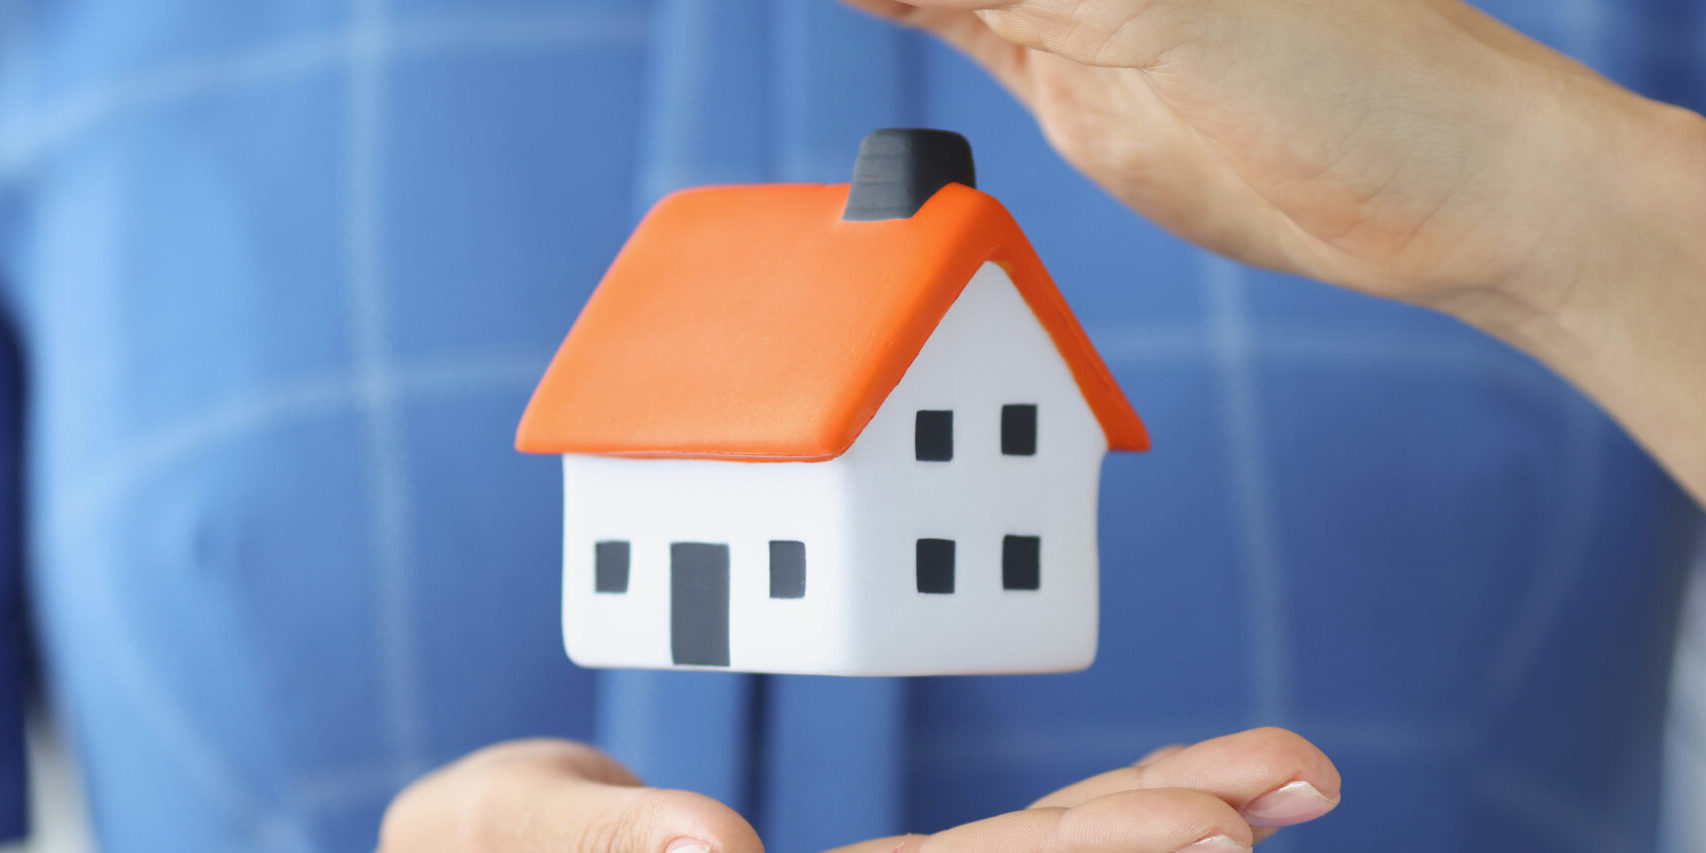 Small house in female hands of air. Home insurance concept